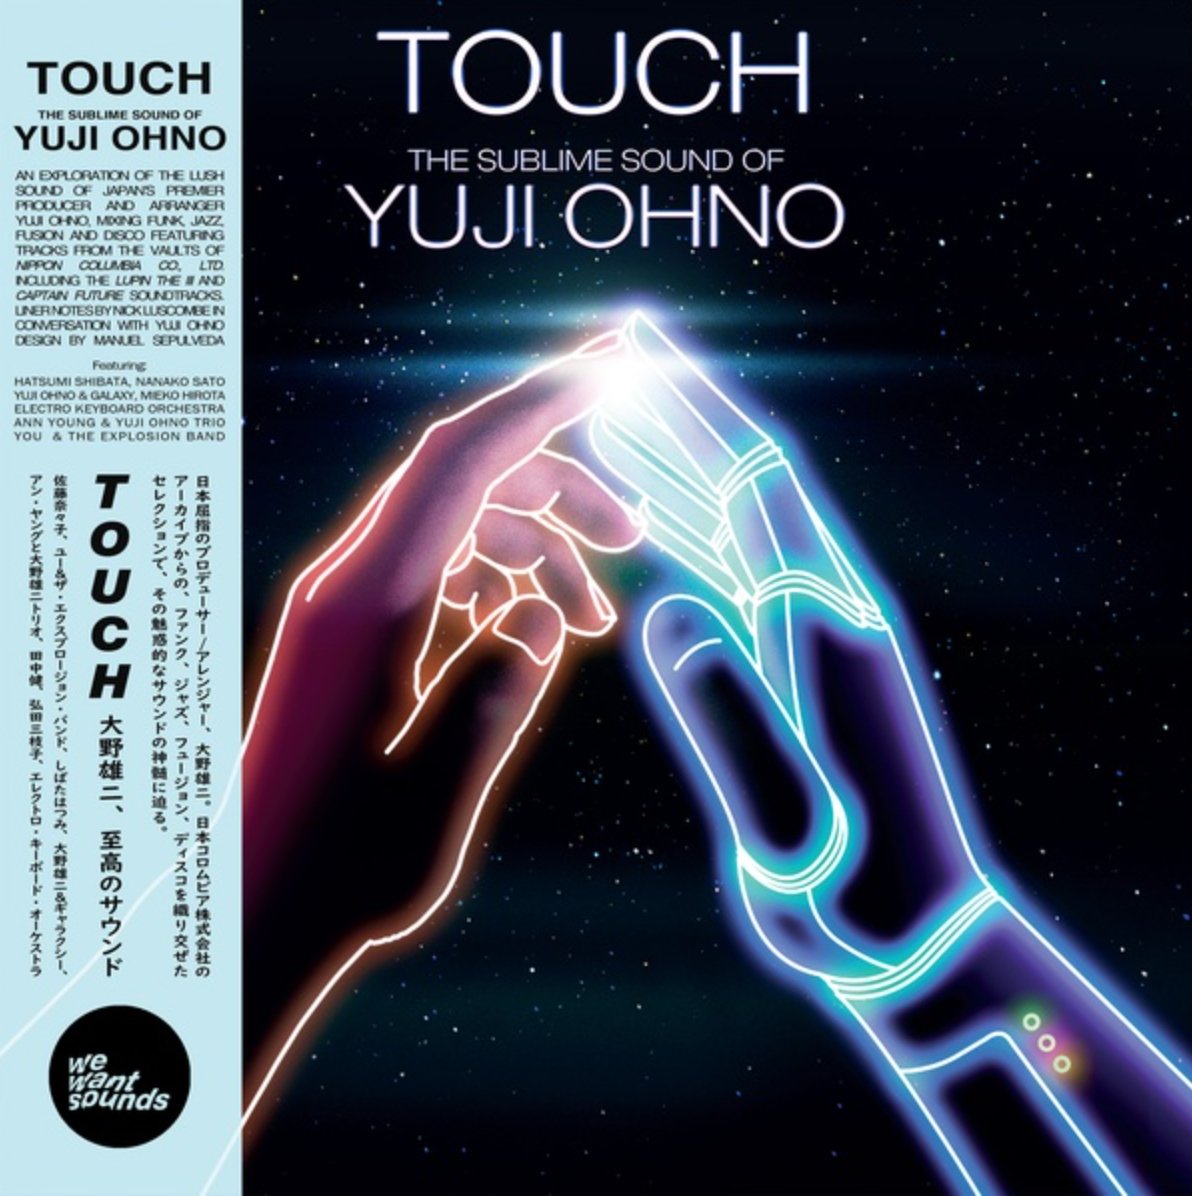 Yuji Ohno - Touch: The Sublime Sound of Yuji Ohno - Inner Ocean Records